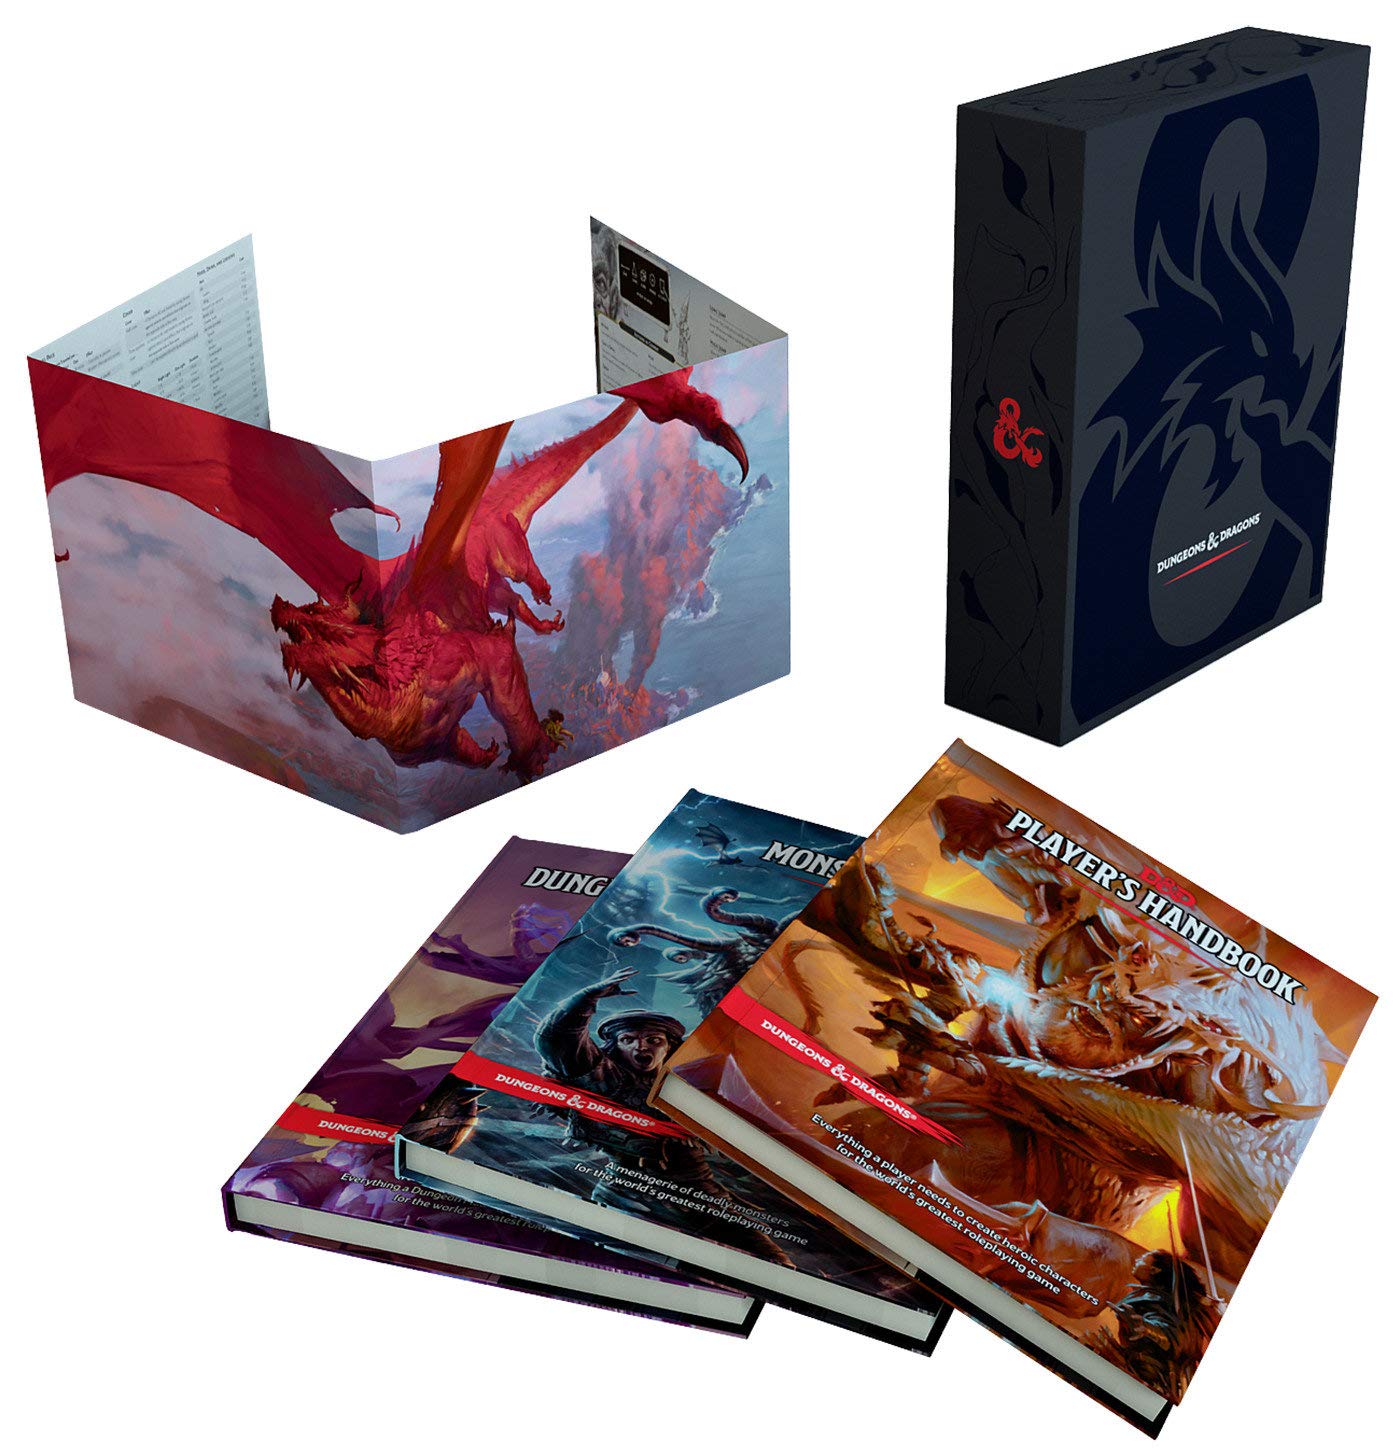 Dungeons & Dragons Core Rulebooks Gift Set (Special Foil Covers Edition With Slipcase, Player'S Handbook, Dungeon Master'S Guide, Monster Manual, Dm Screen) - Roleplaying Games - The Hooded Goblin